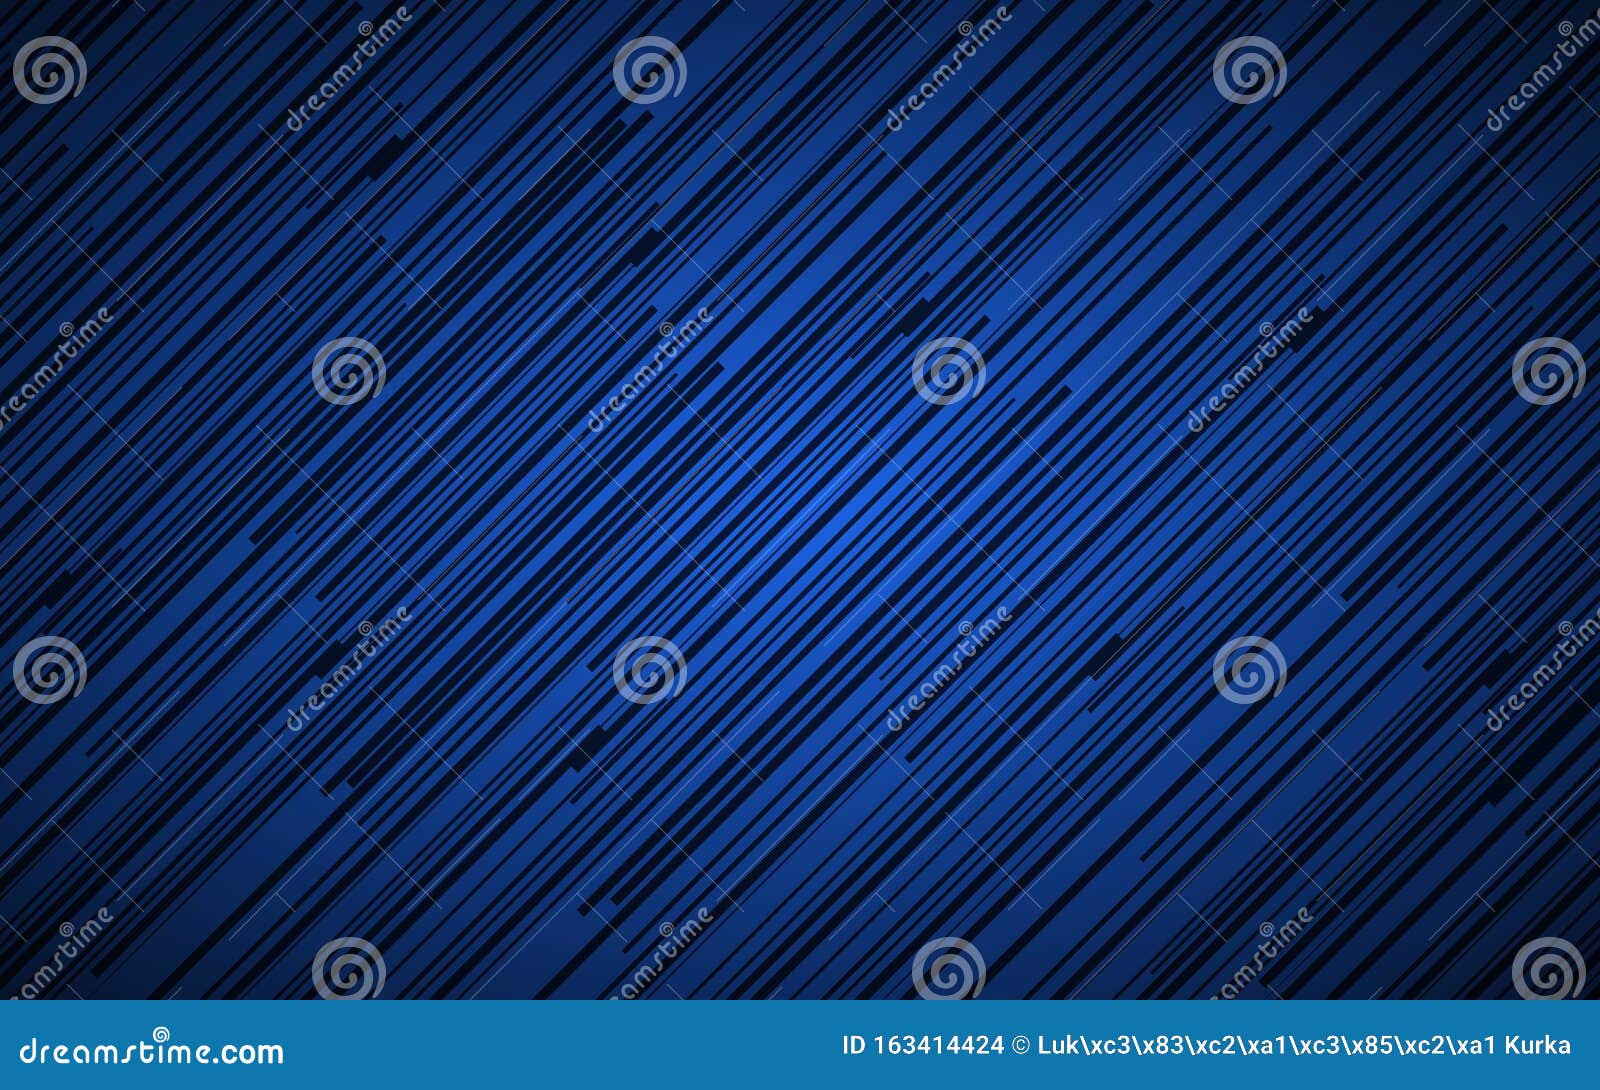 Dark Abstract Background with Blue and Black Slanting Lines, Striped ...